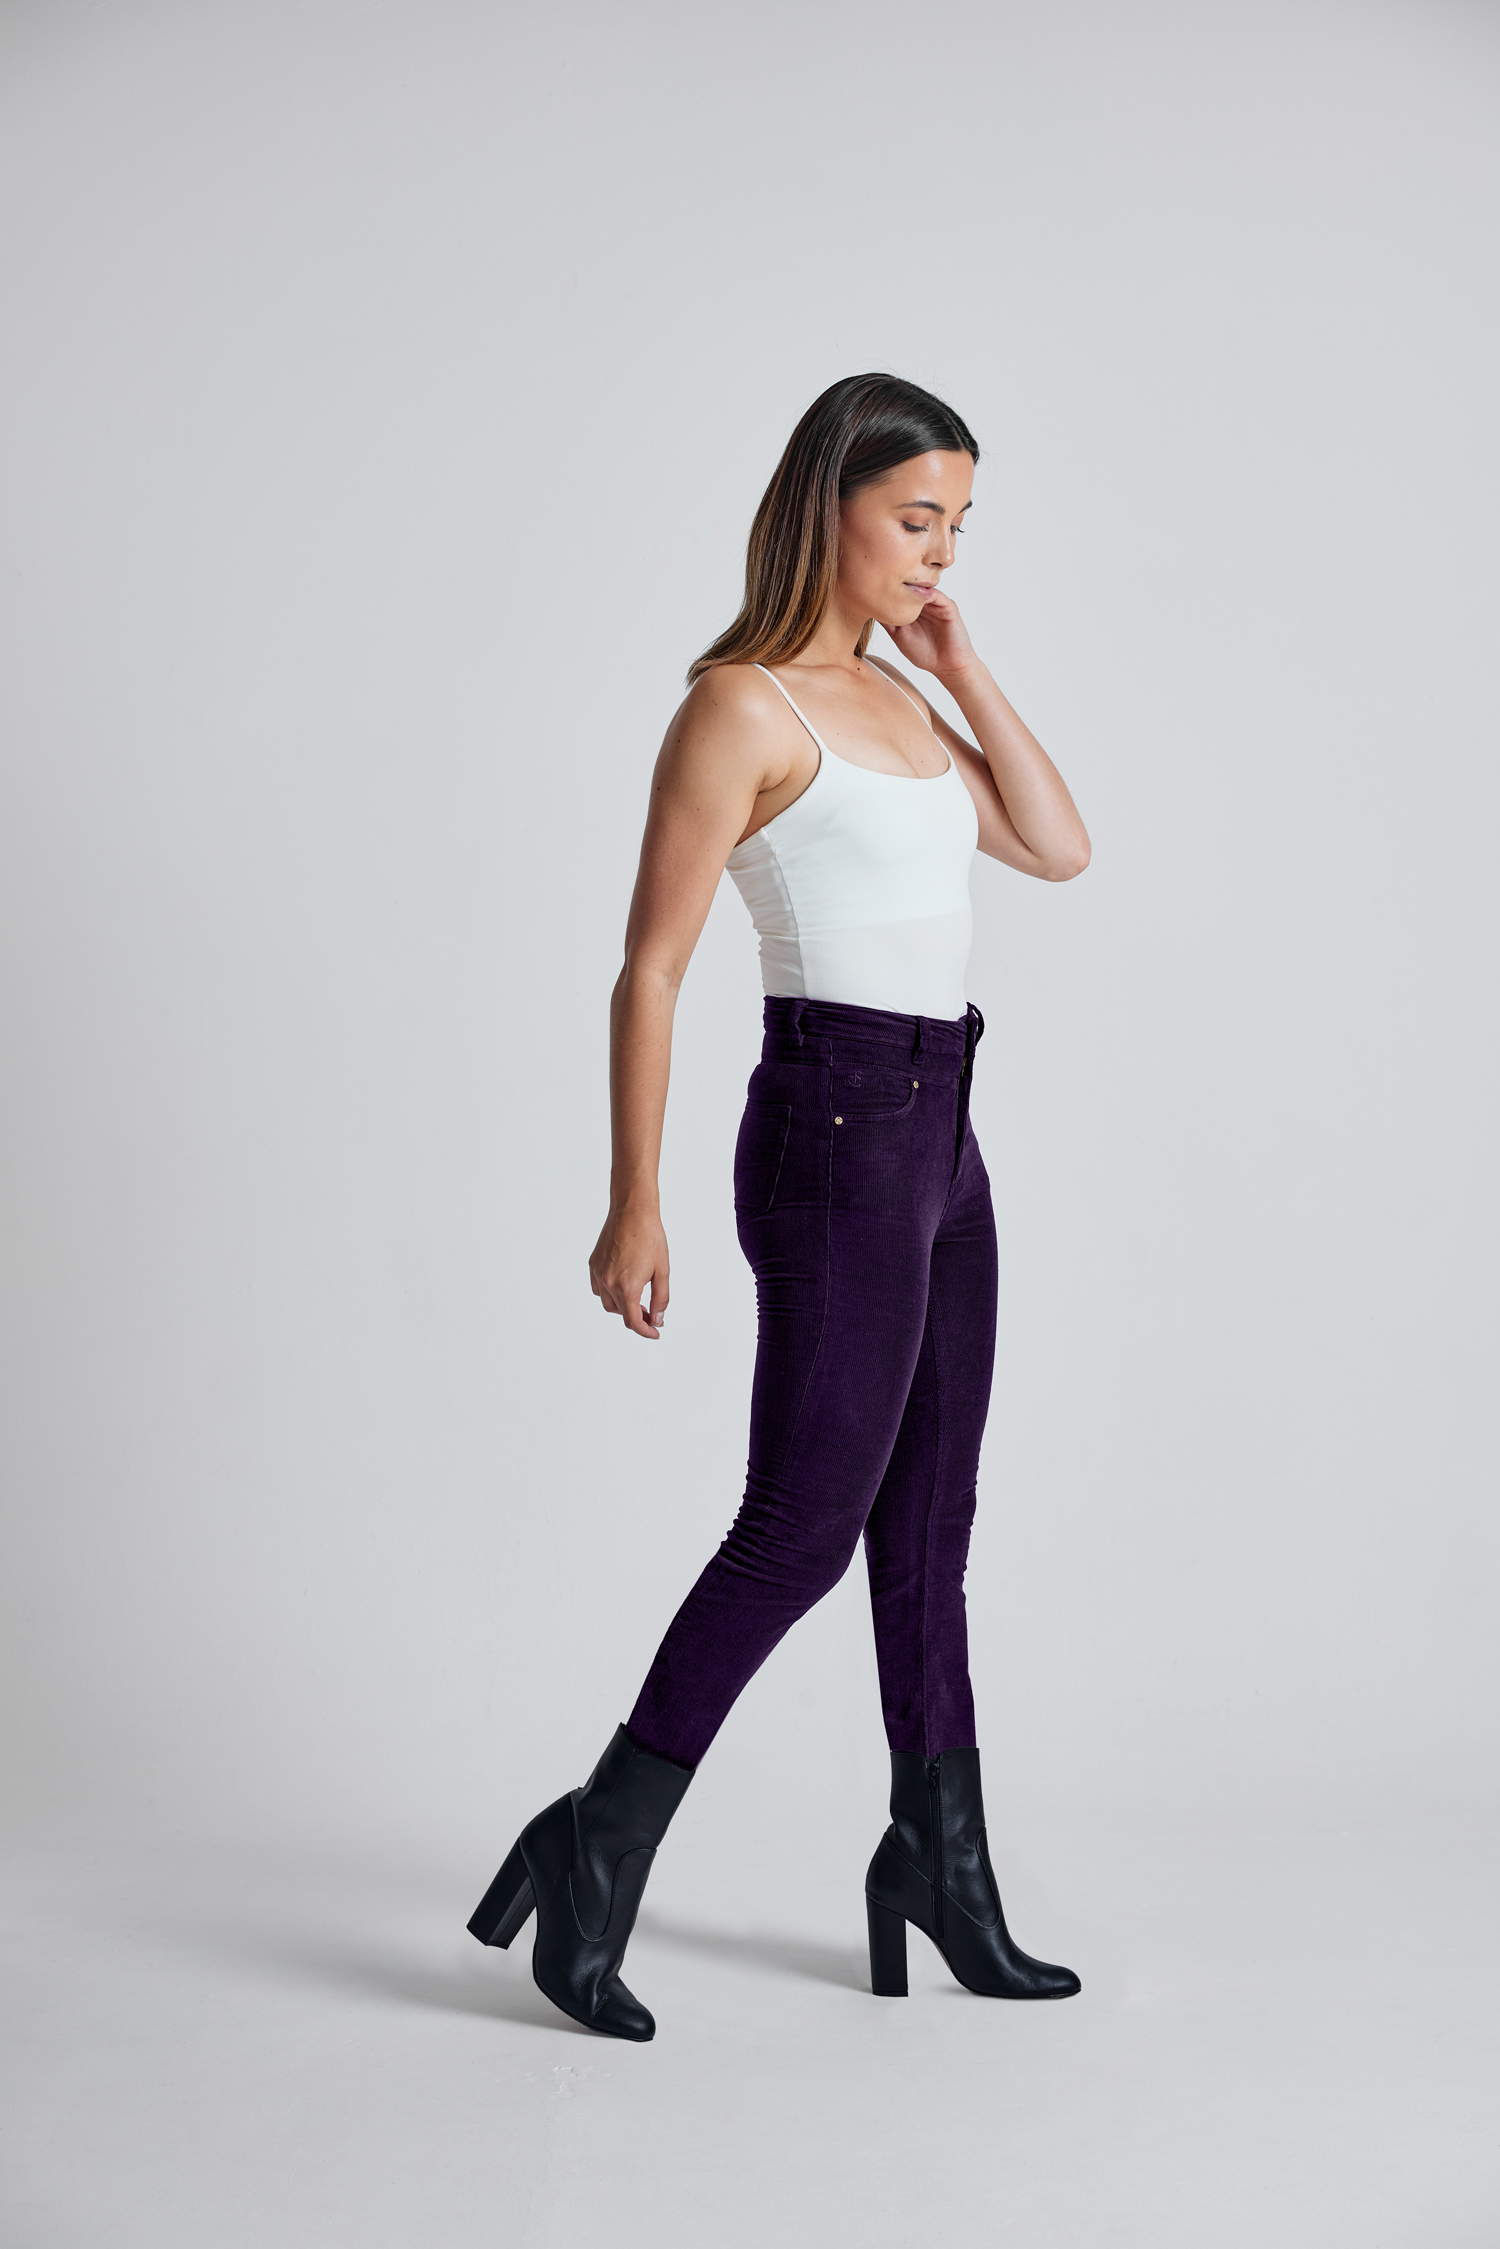 Aubergine Babycord Nina High Waisted Skinny Jeans - GOTS Certified Organic Cotton and Elastane